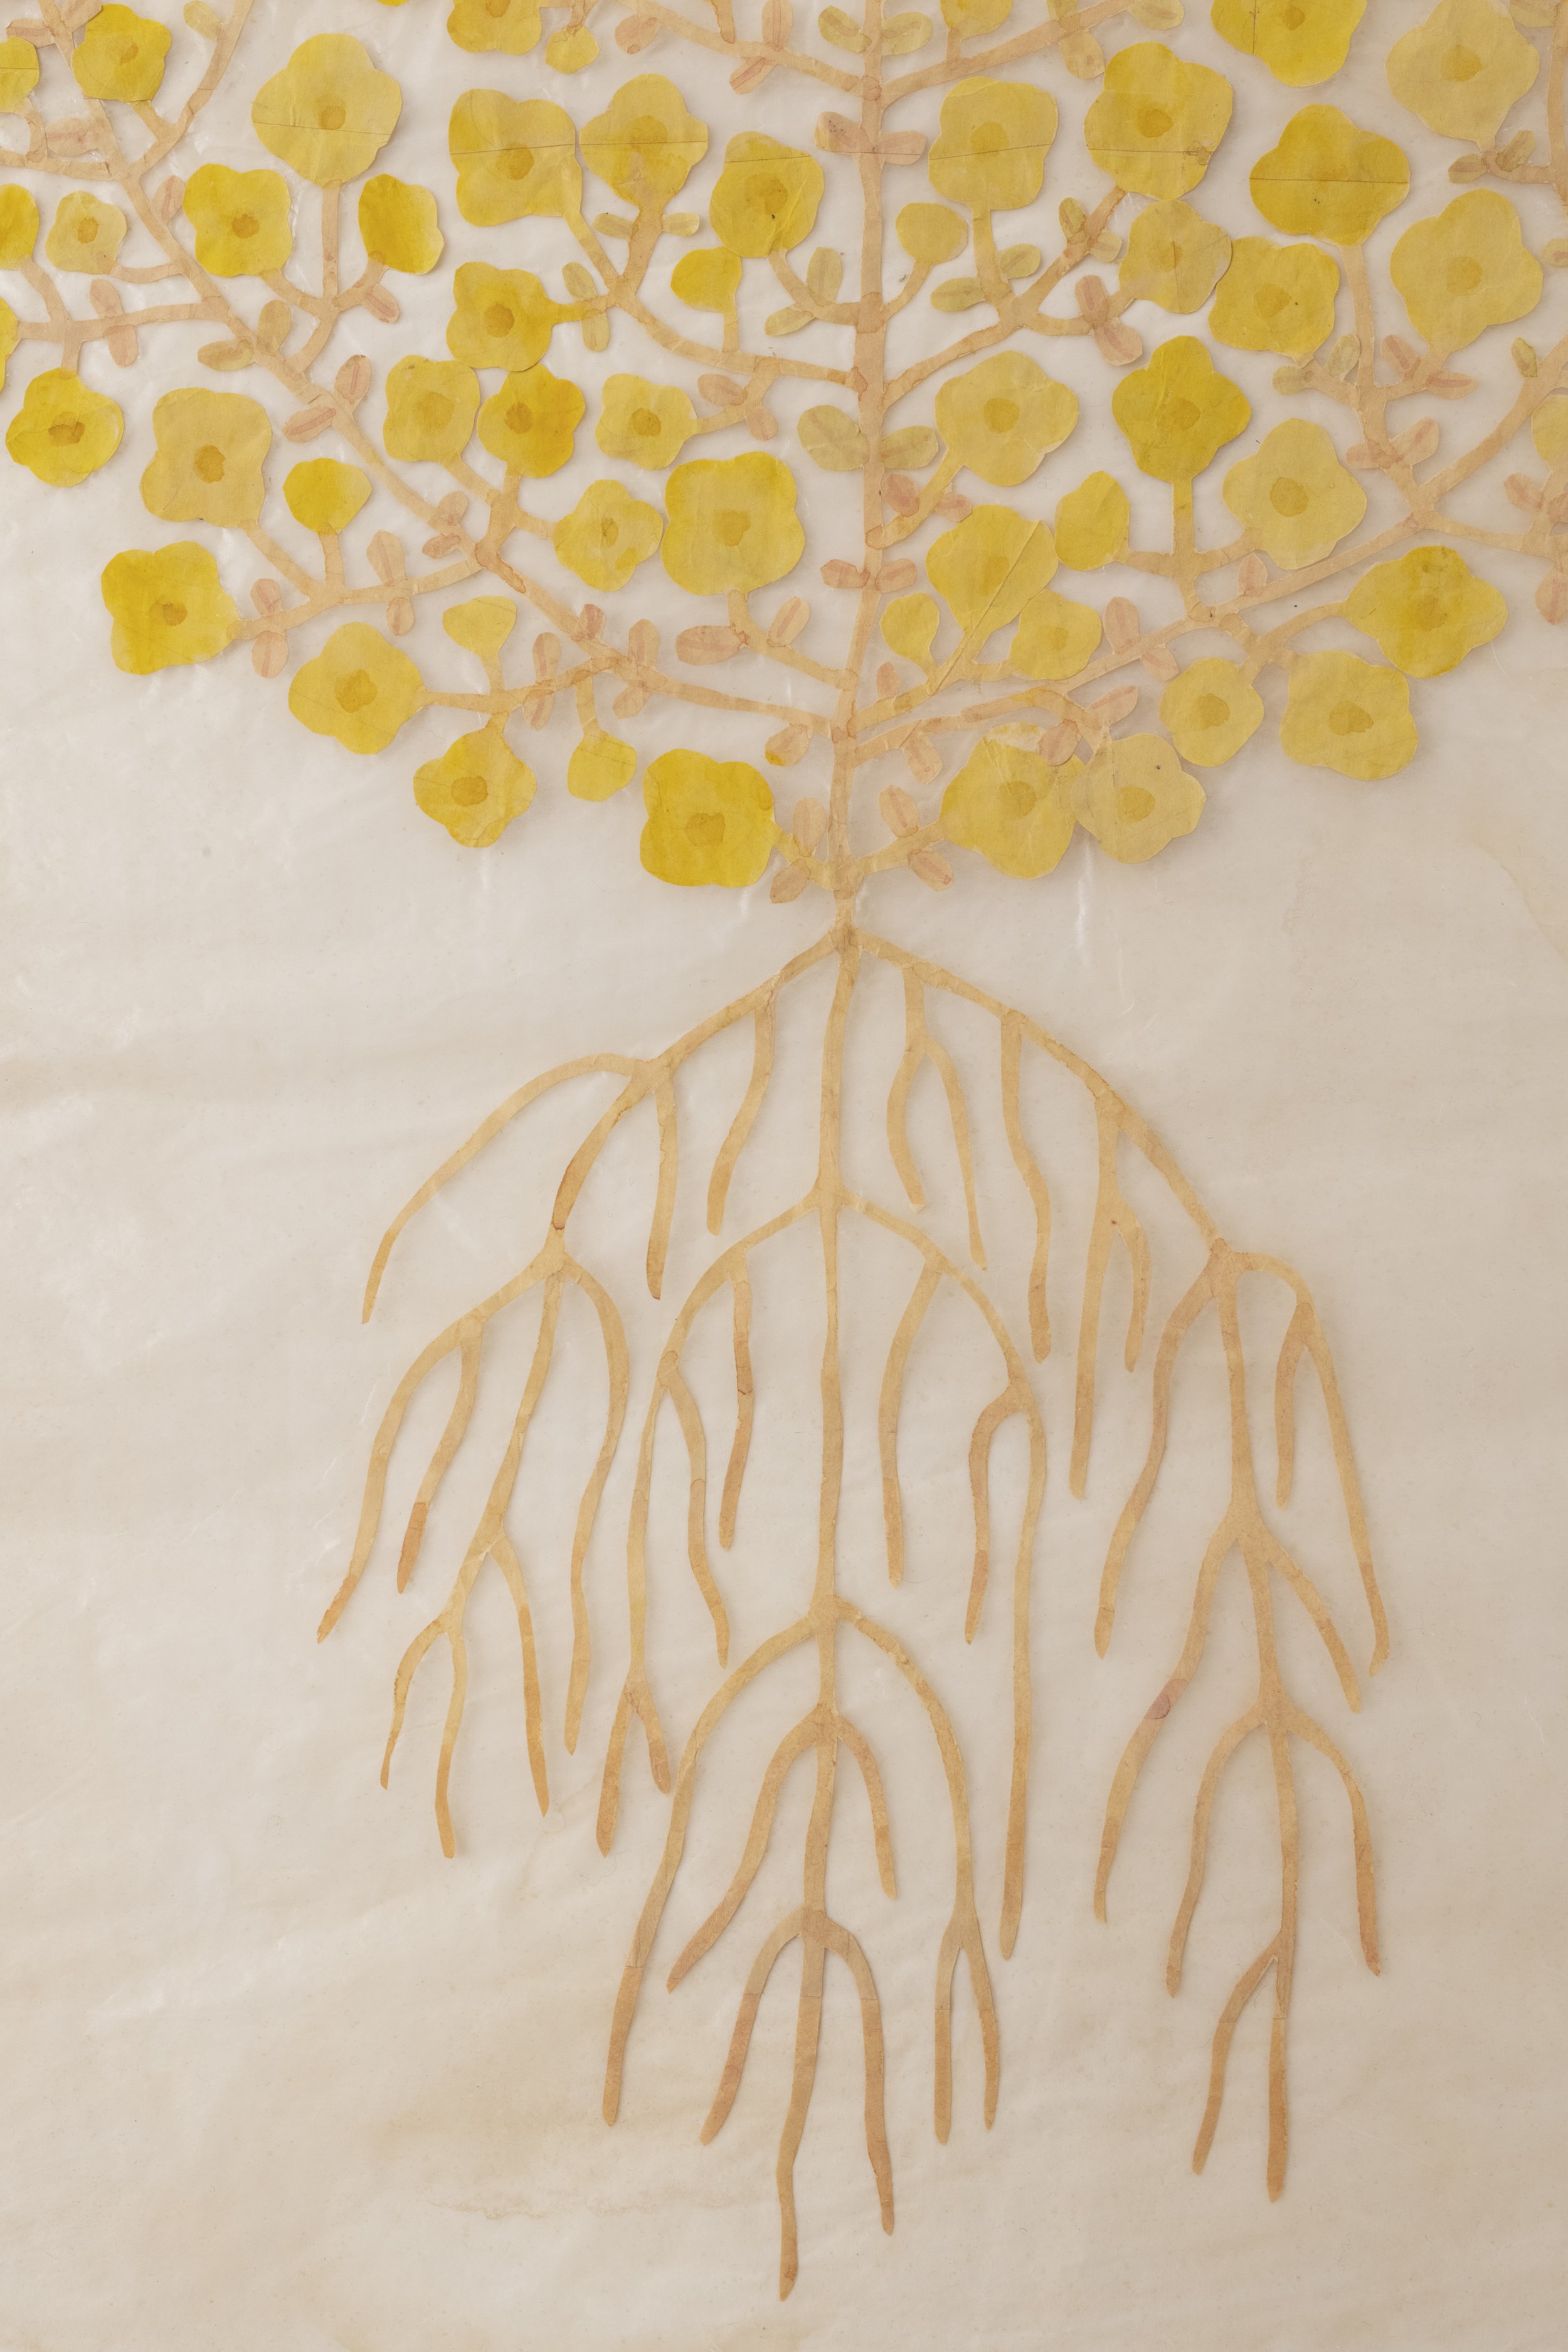 Fumi Imamura, One flower (yellow), 2022, collage, watercolor on paper, 66.5 x 43 cm (26 1_8 x 16 7_8 in) (unframed) 80 x 60 cm (31 1_2 x 23 5_8 in) (framed), REF 2441, detail (1).jpg